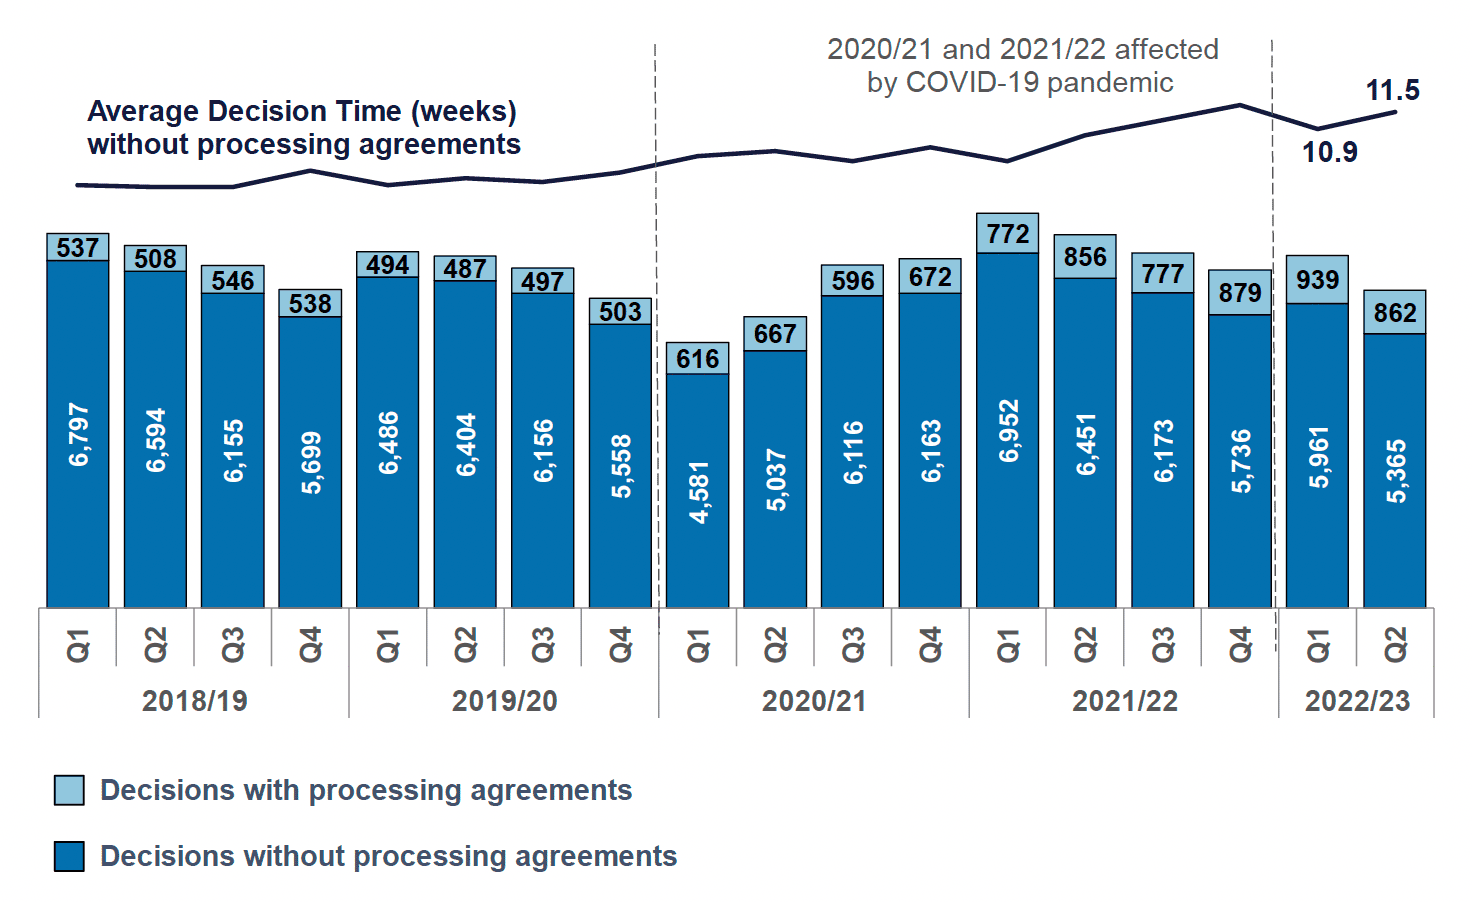 A stacked column chart showing number of local applications decided in each quarter since 2018/19. Also a line chart of average decision times for local applications without processing agreements. Numbers in Q1 and Q2 of 2022/23 were slightly lower than before the pandemic in 2019/20. Average decision times remained higher than before the pandemic at 11.5 weeks in Q2.